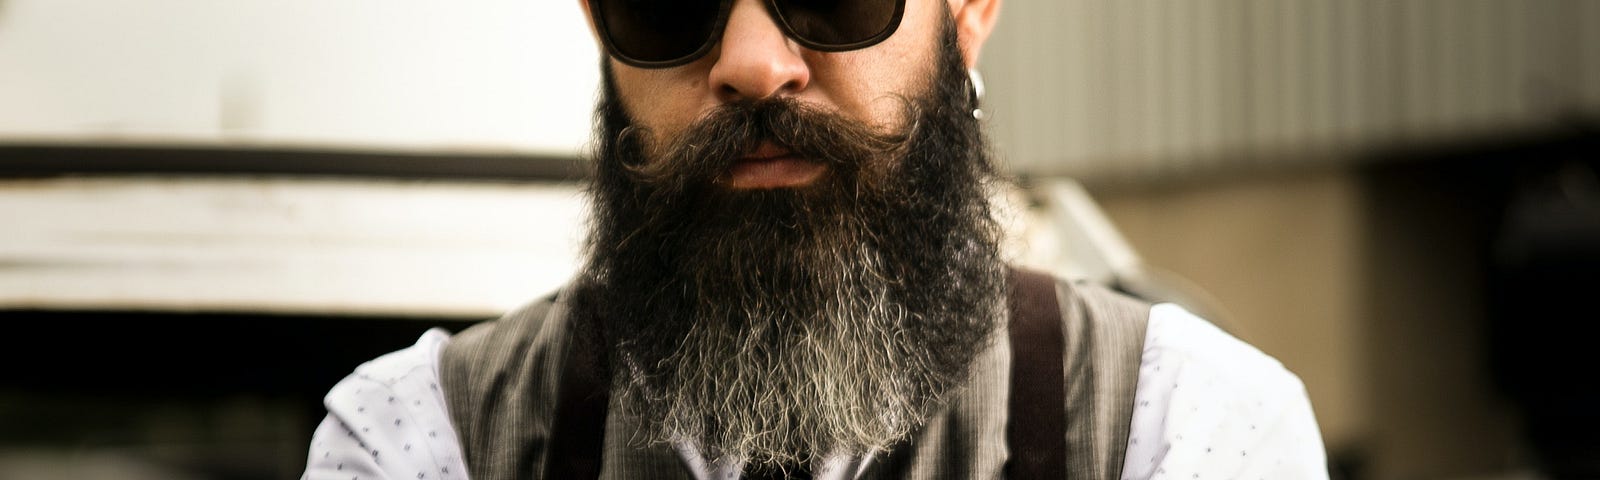 A tough guy with a big beard, sunglasses, a vest, a shirt and tie, and tattoos.